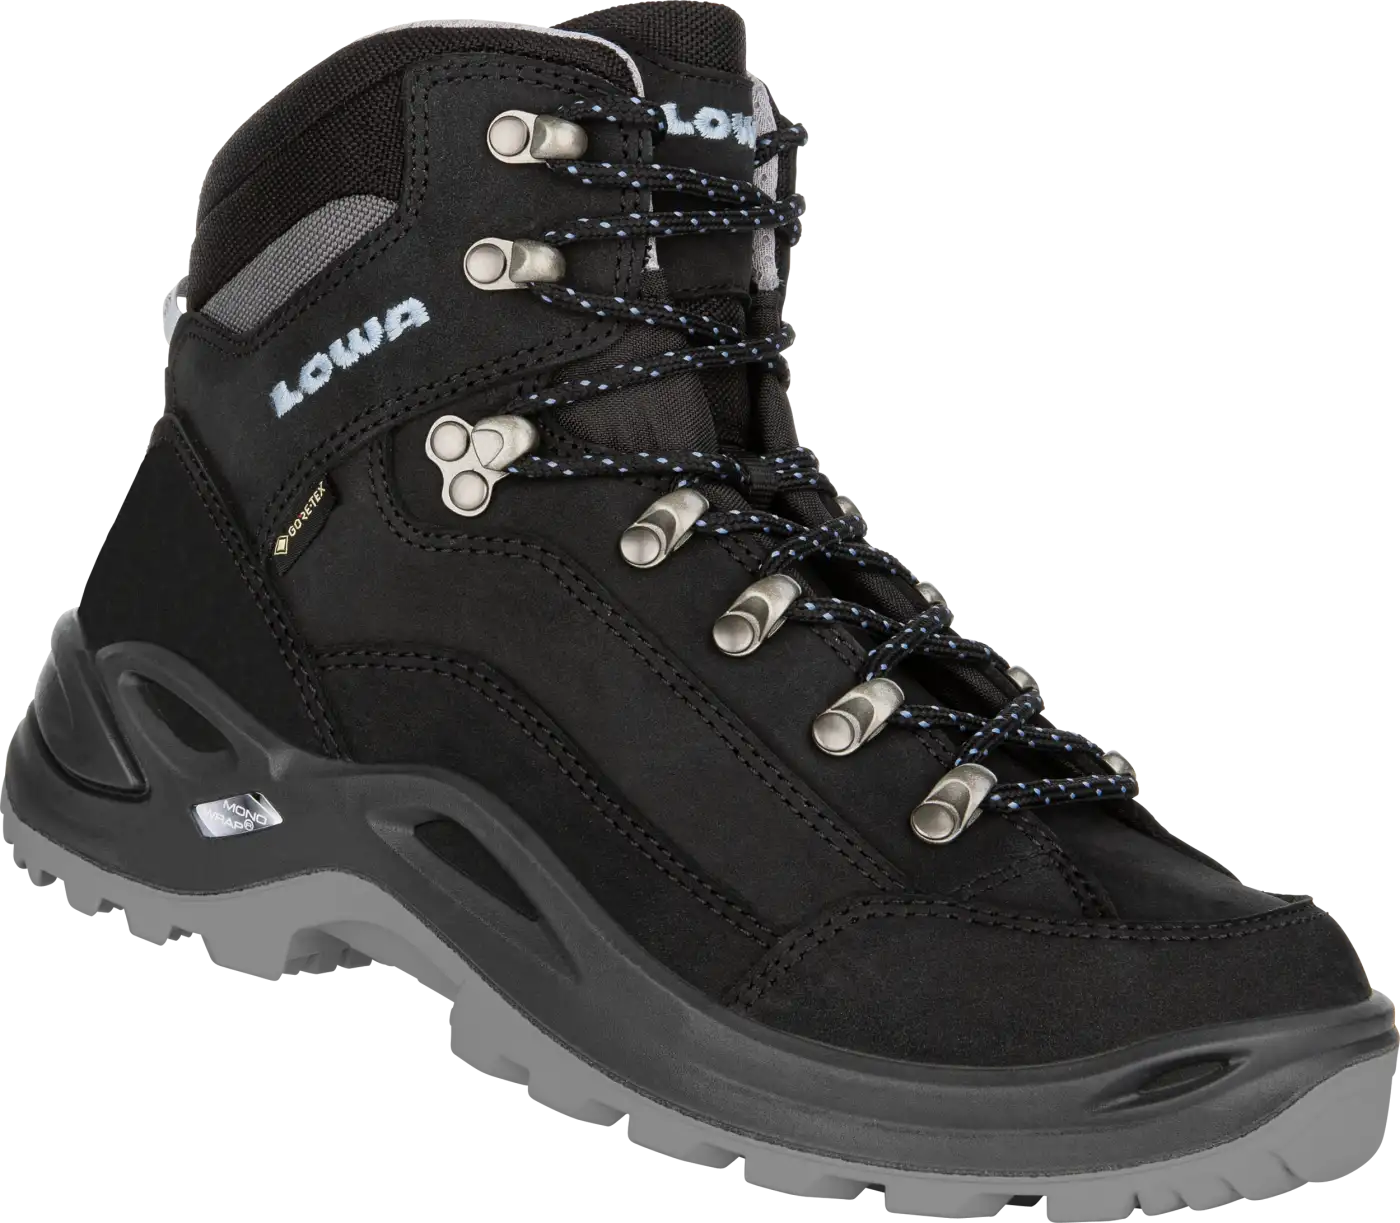 Buty damskie LOWA Renegade GTX mid Ws 320945 9972_renegade gtx mid ws_2021_outer rotated